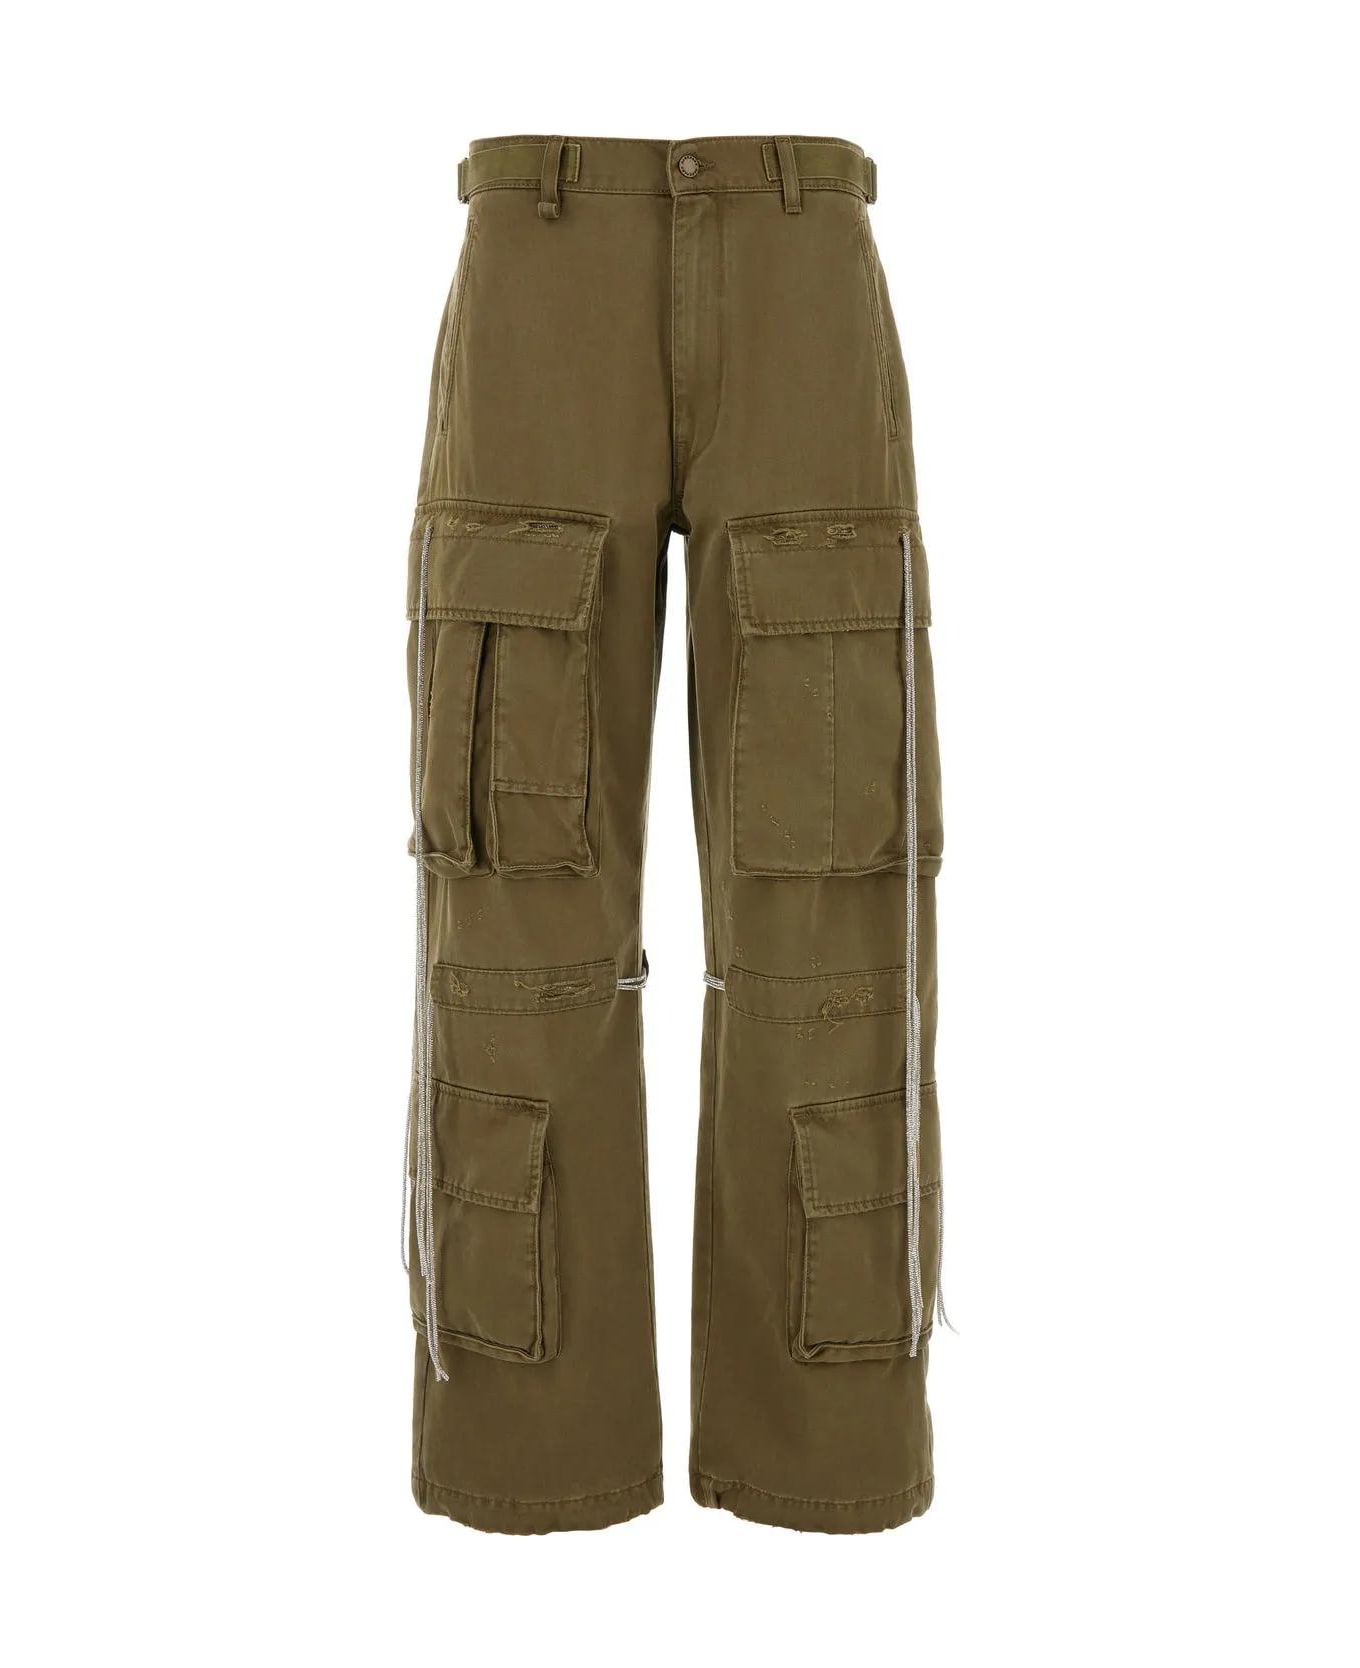 DARKPARK Army Green Cotton Lavy Julian Cargo Pant - Green ボトムス